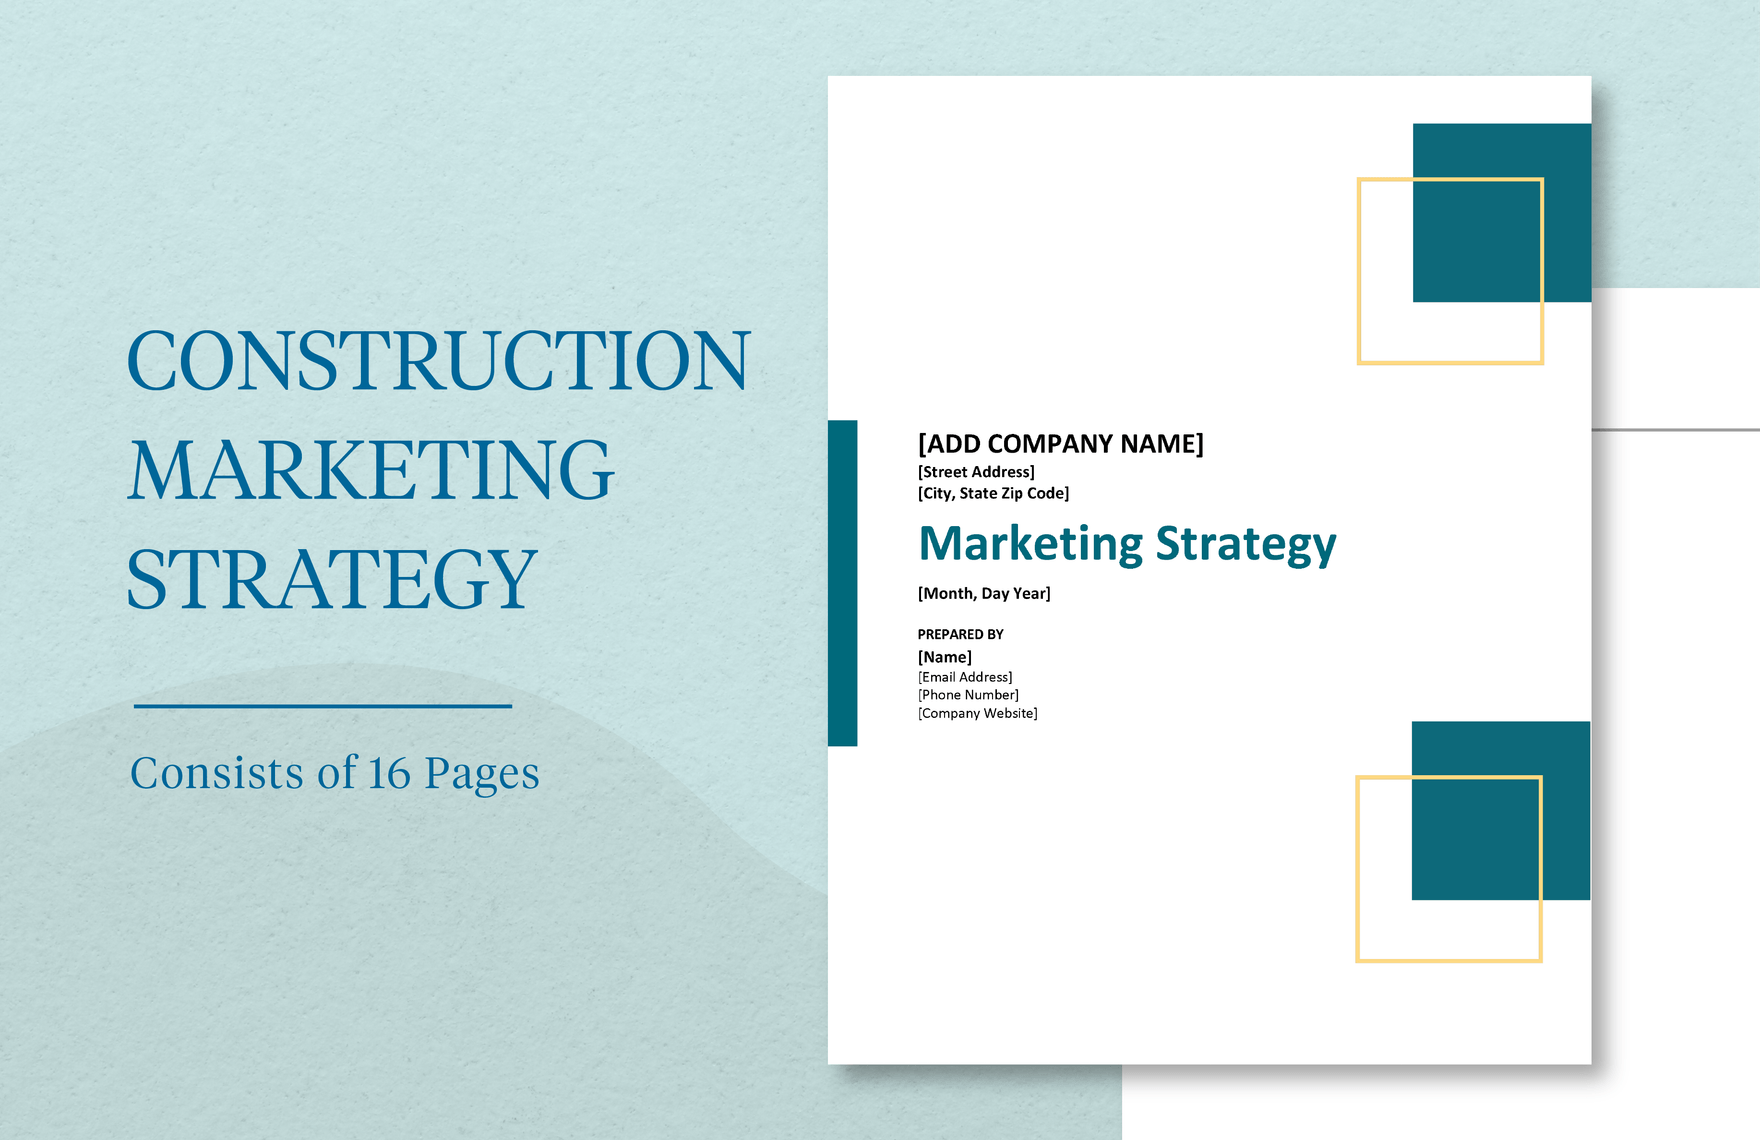 Construction Marketing Strategy Template in Word, Google Docs, Apple Pages